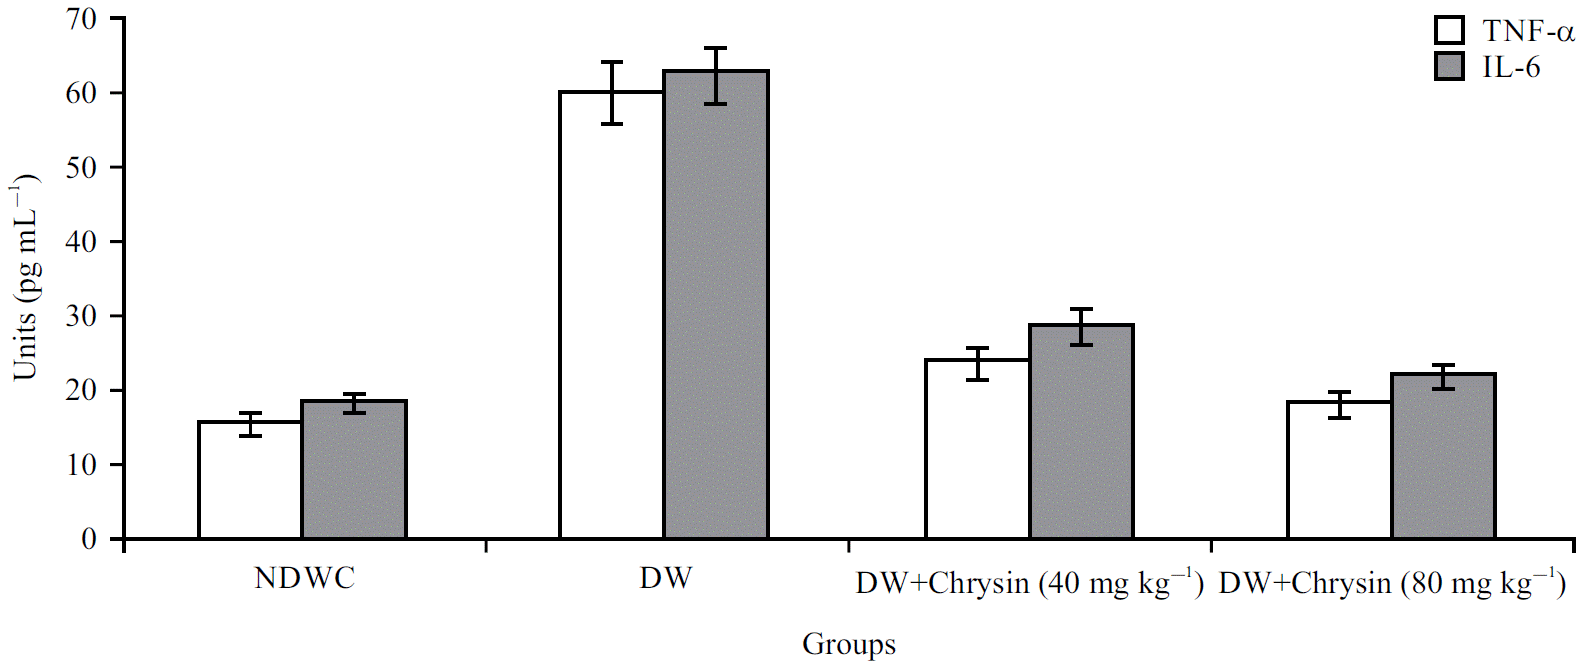 Image for - Anti-Inflammatory and Antioxidant Effects of Chrysin Mitigates Diabetic Foot Ulcers